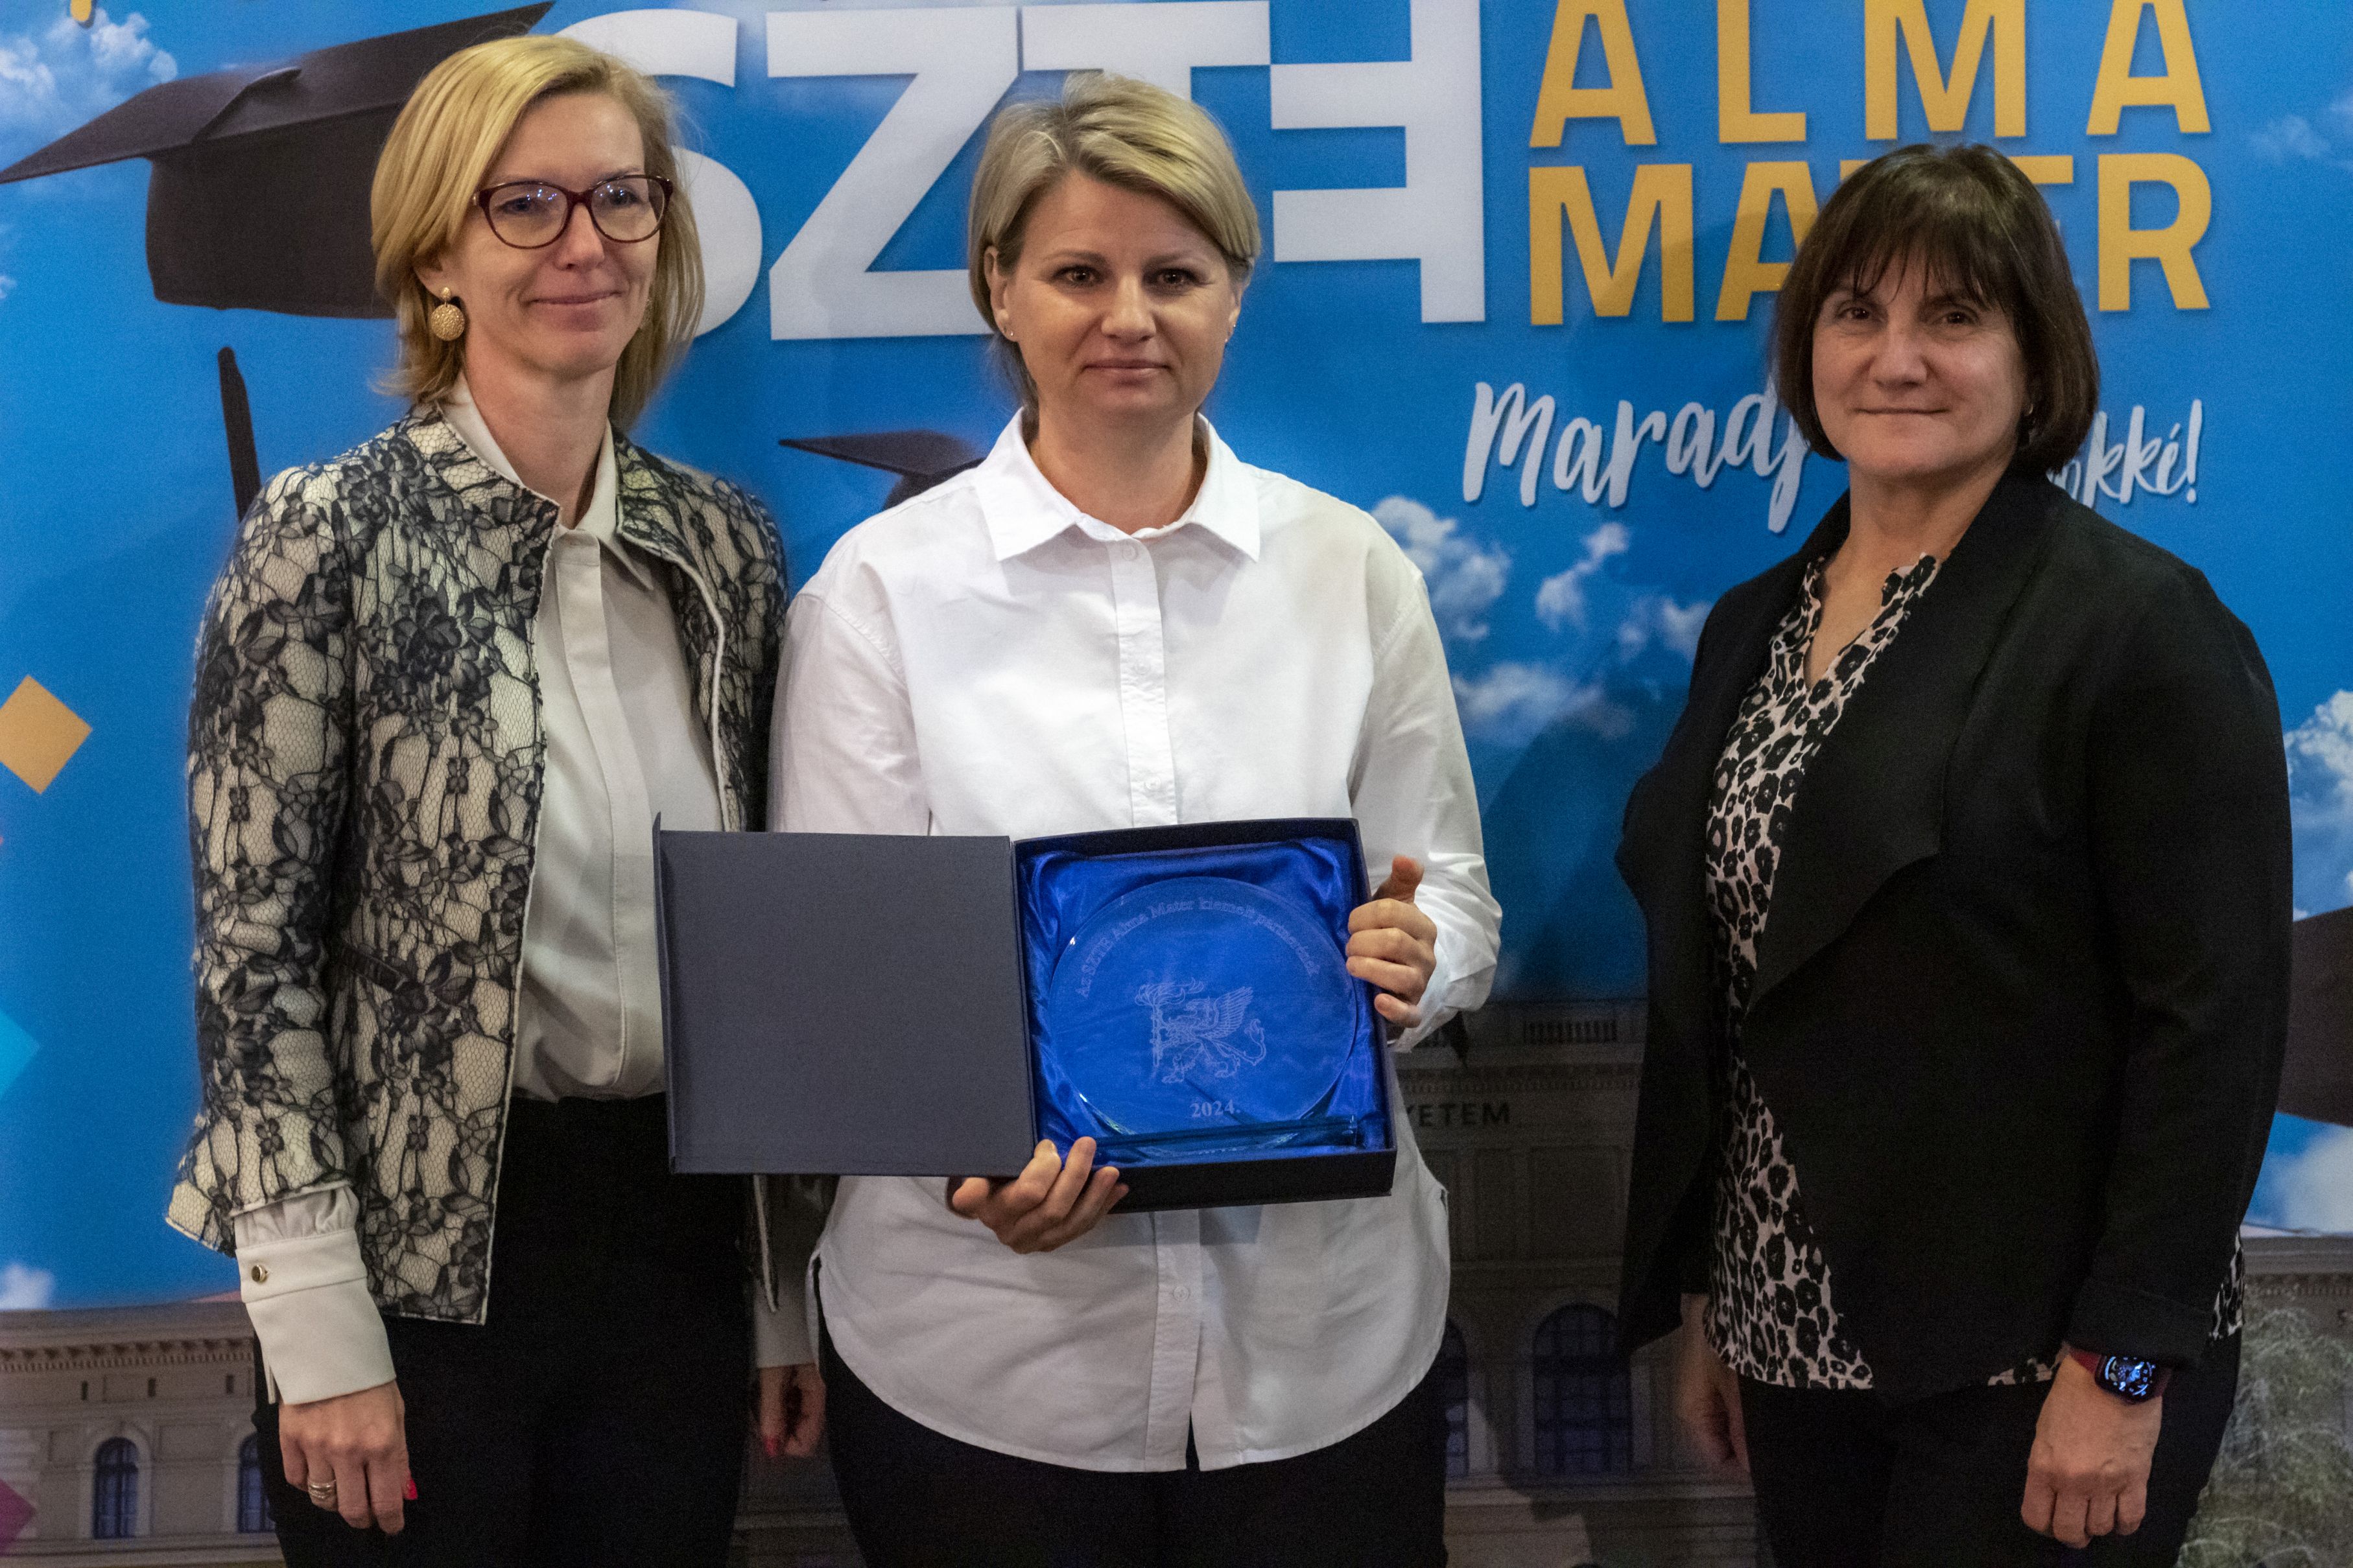 CAS SOFTWARE KFT. WINS THIS YEAR'S SZTE ALMA MATER AWARD